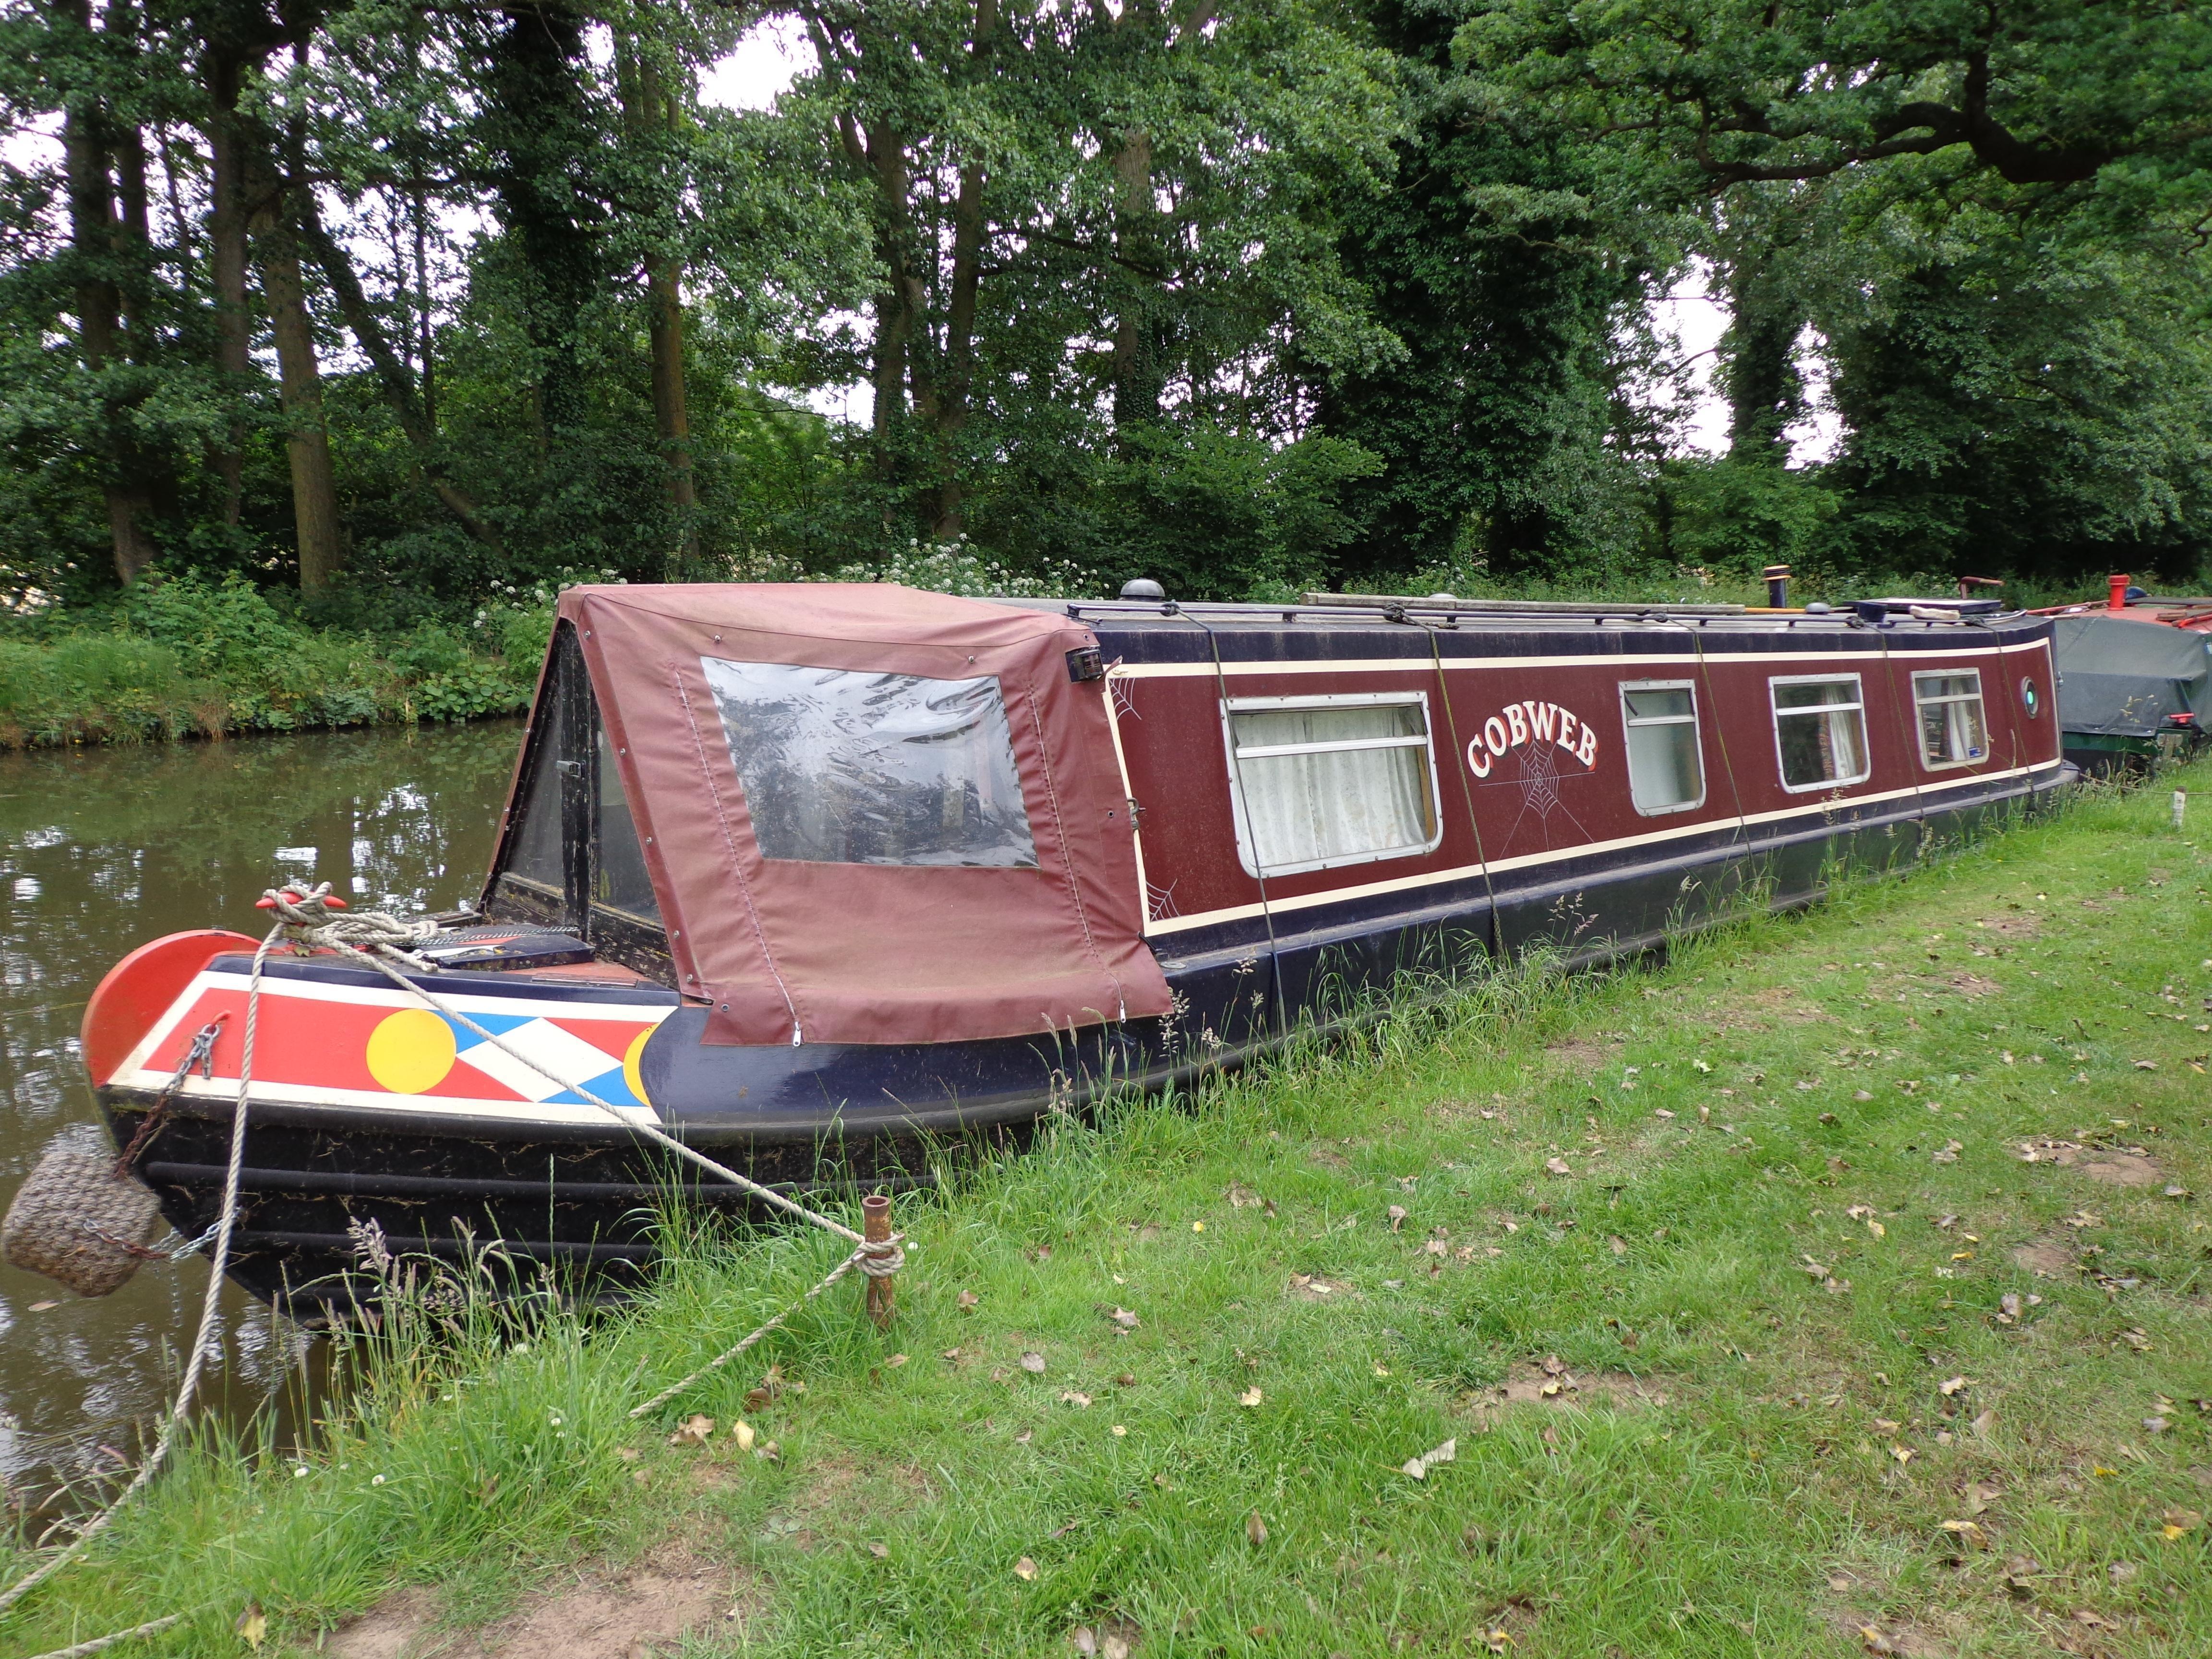 Narrow Boat Colesmorton Marine with Traditional Stern, Pyrford Marina on River Wey, Surrey